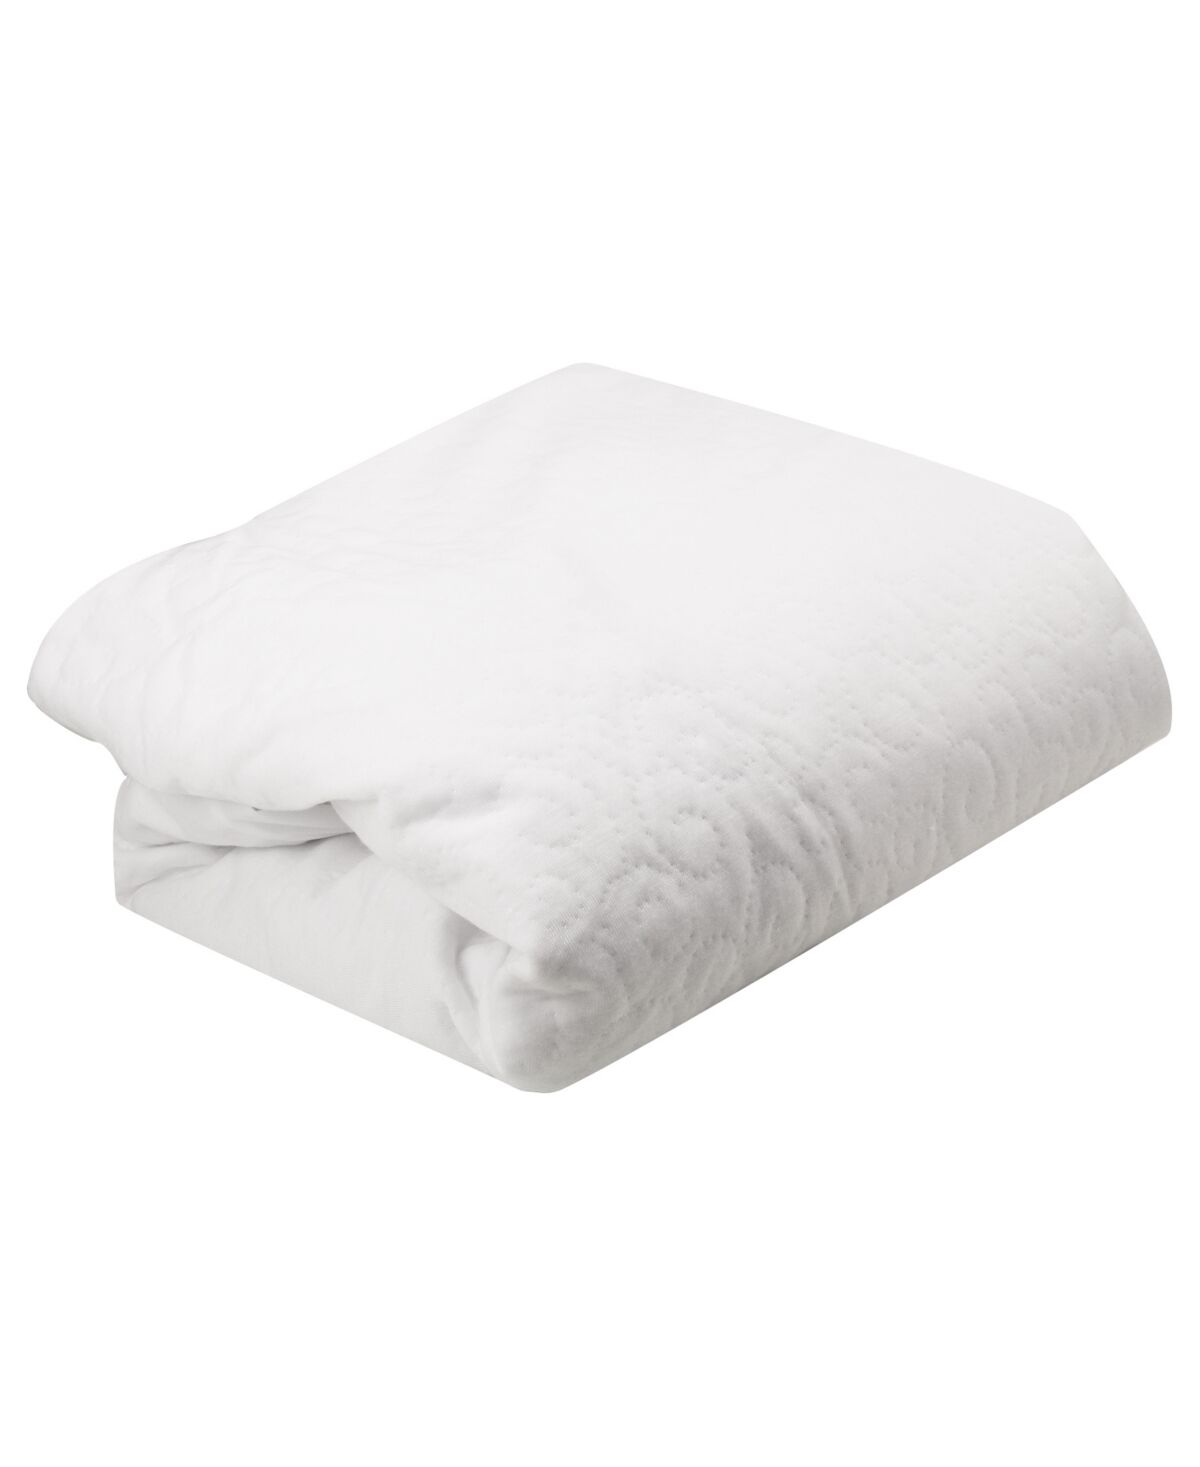 GhostBed Cal King Size Premium Mattress Protector - White